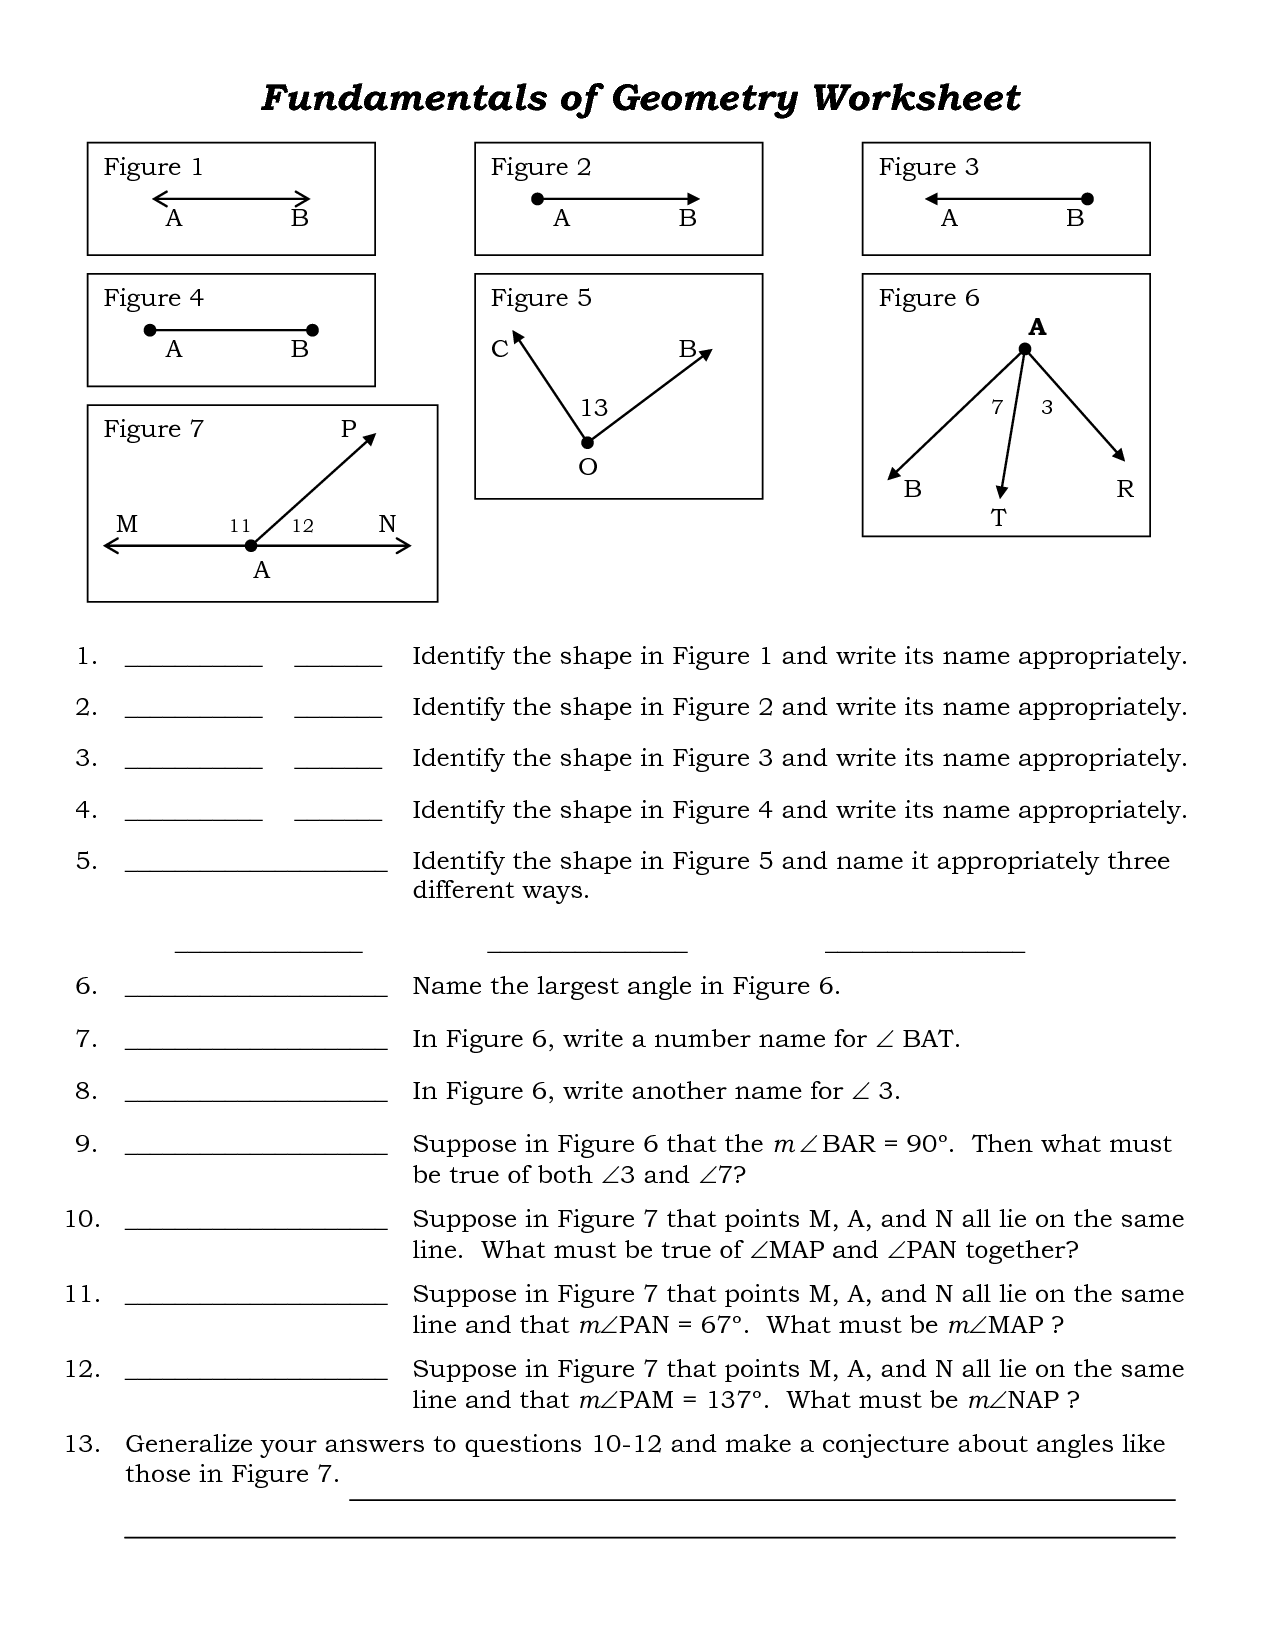 7-best-images-of-printable-worksheets-for-high-school-students-high-school-student-worksheets